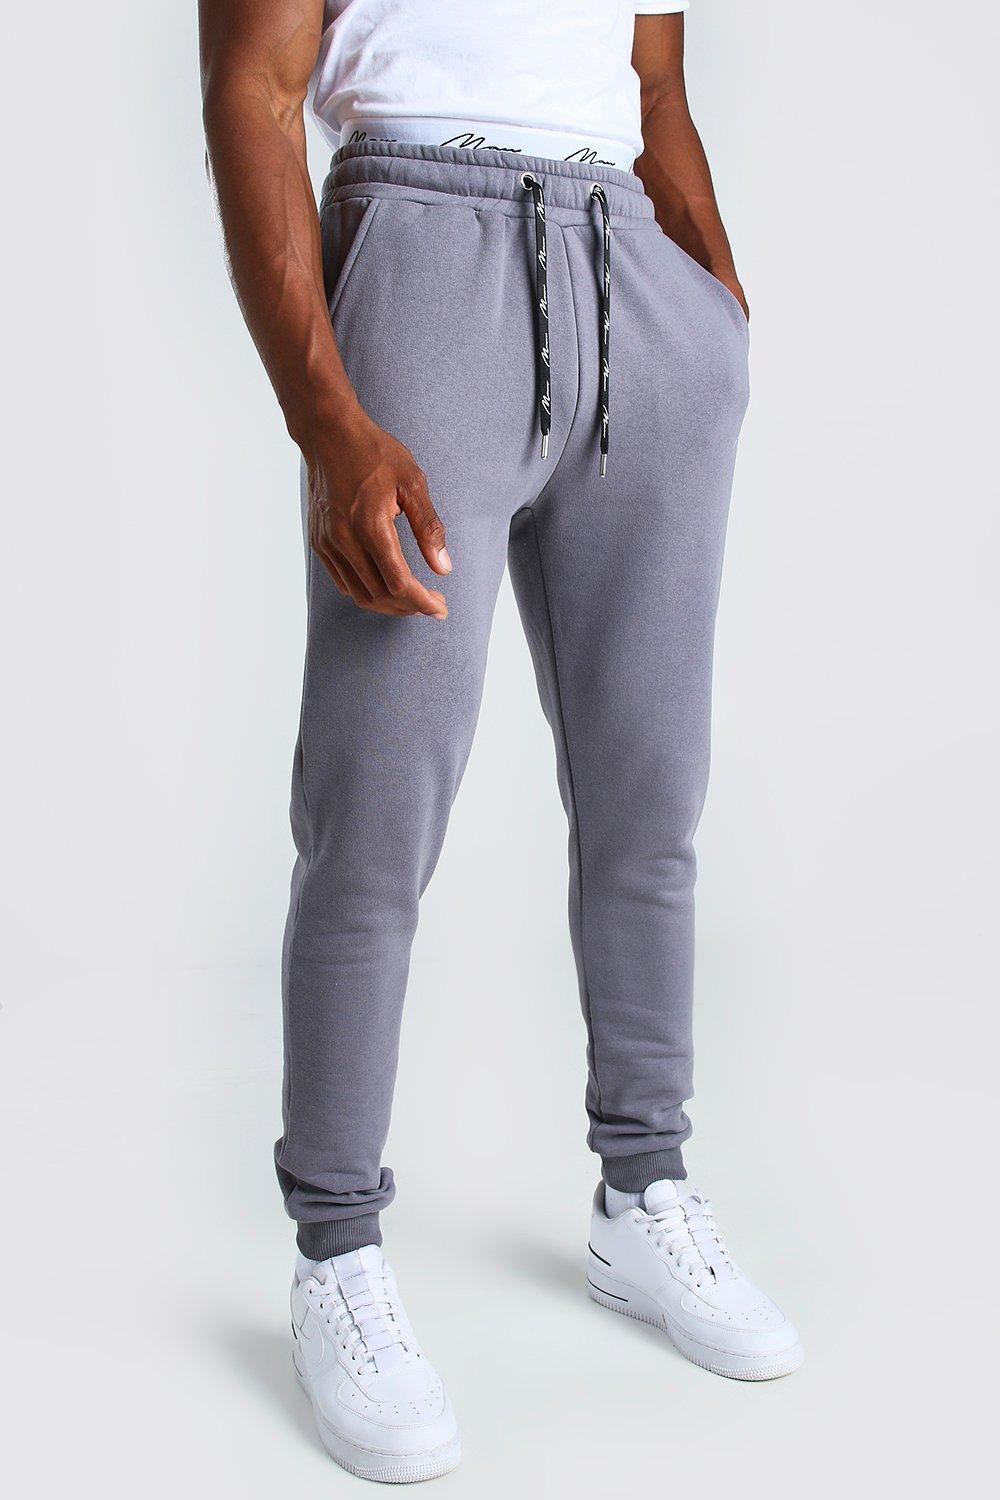 BoohooMAN Skinny Fit Man Signature Double Waistband Jogger in Grey (Gray)  for Men - Lyst